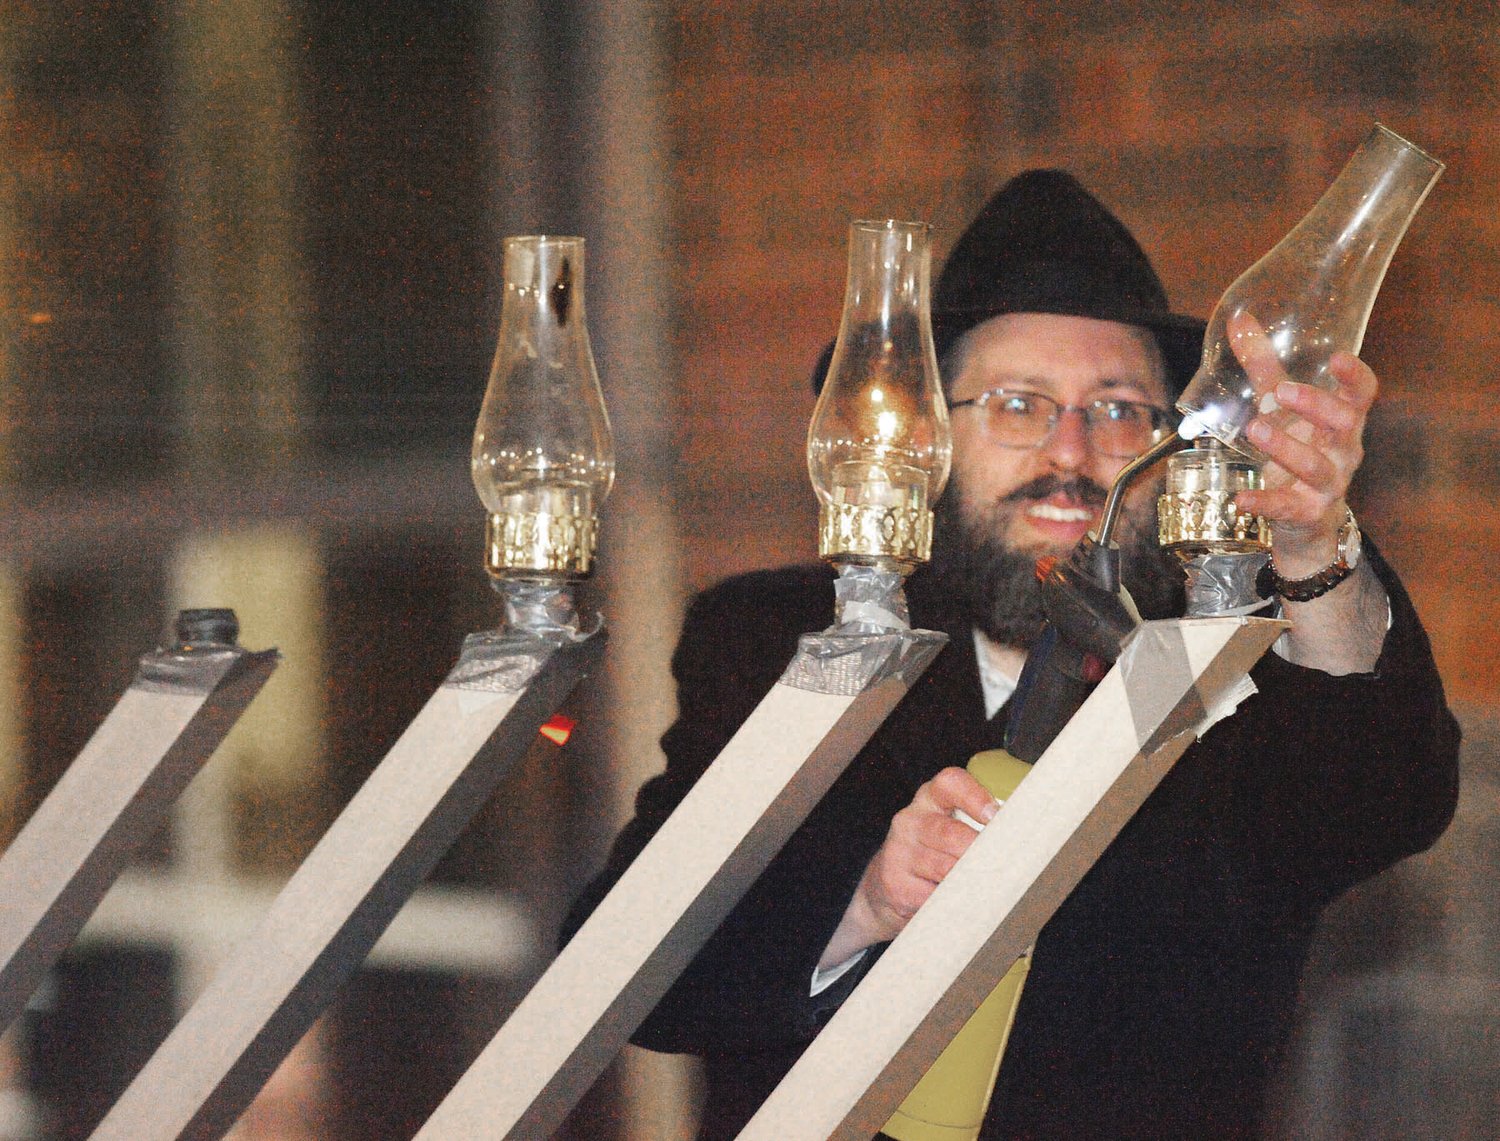 Rabbi Mendel Prus from Chabad Lubavitch of Doylestown lights the Hanukkah menorah in front of the courthouse in Doylestown. Photograph by Tom Shewbrooks.